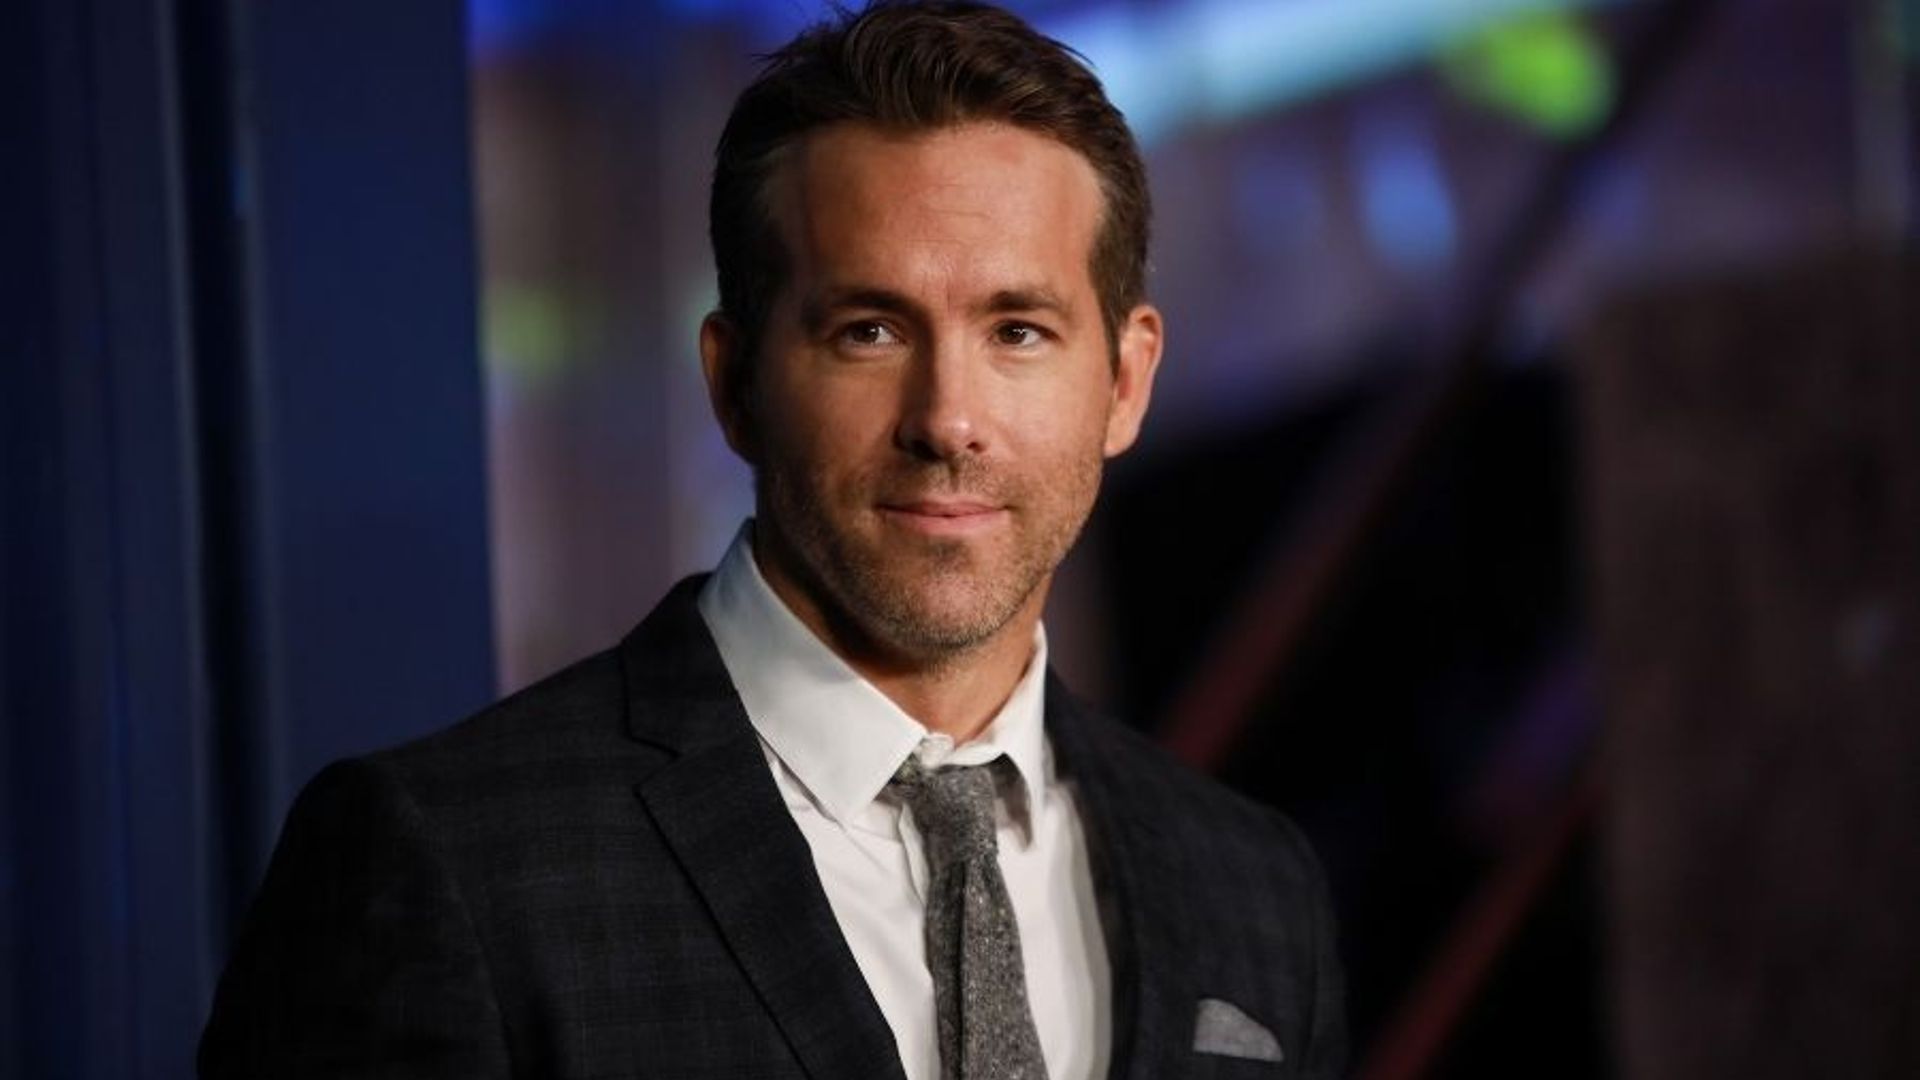 Ryan Reynolds opens up about his anxiety – and gets support from Hugh Jackman